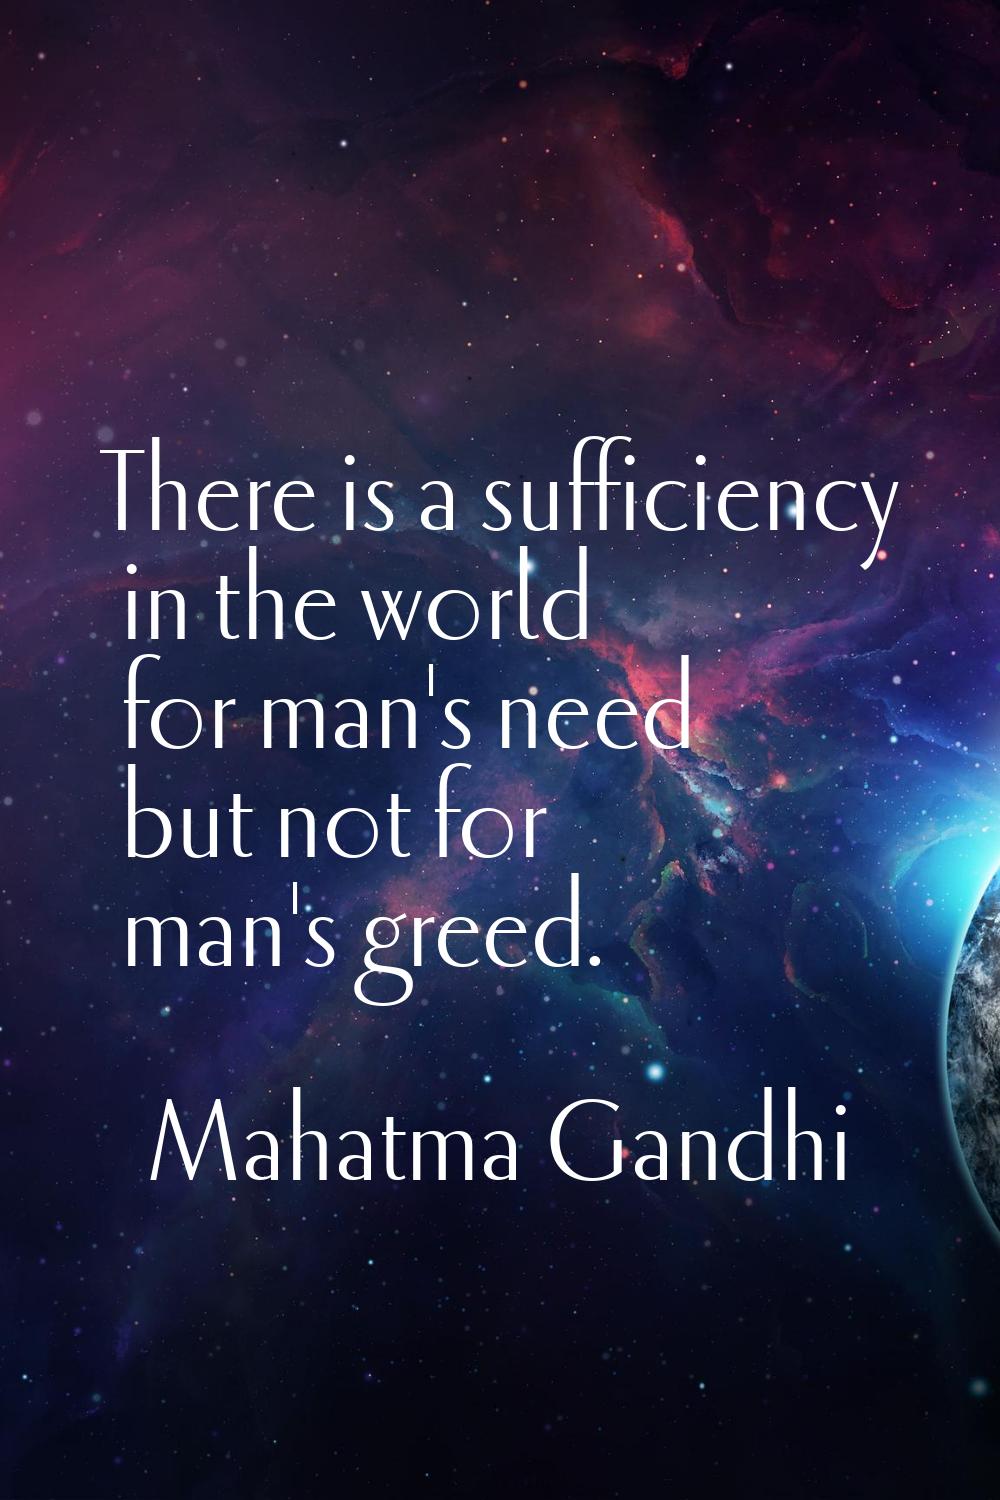 There is a sufficiency in the world for man's need but not for man's greed.